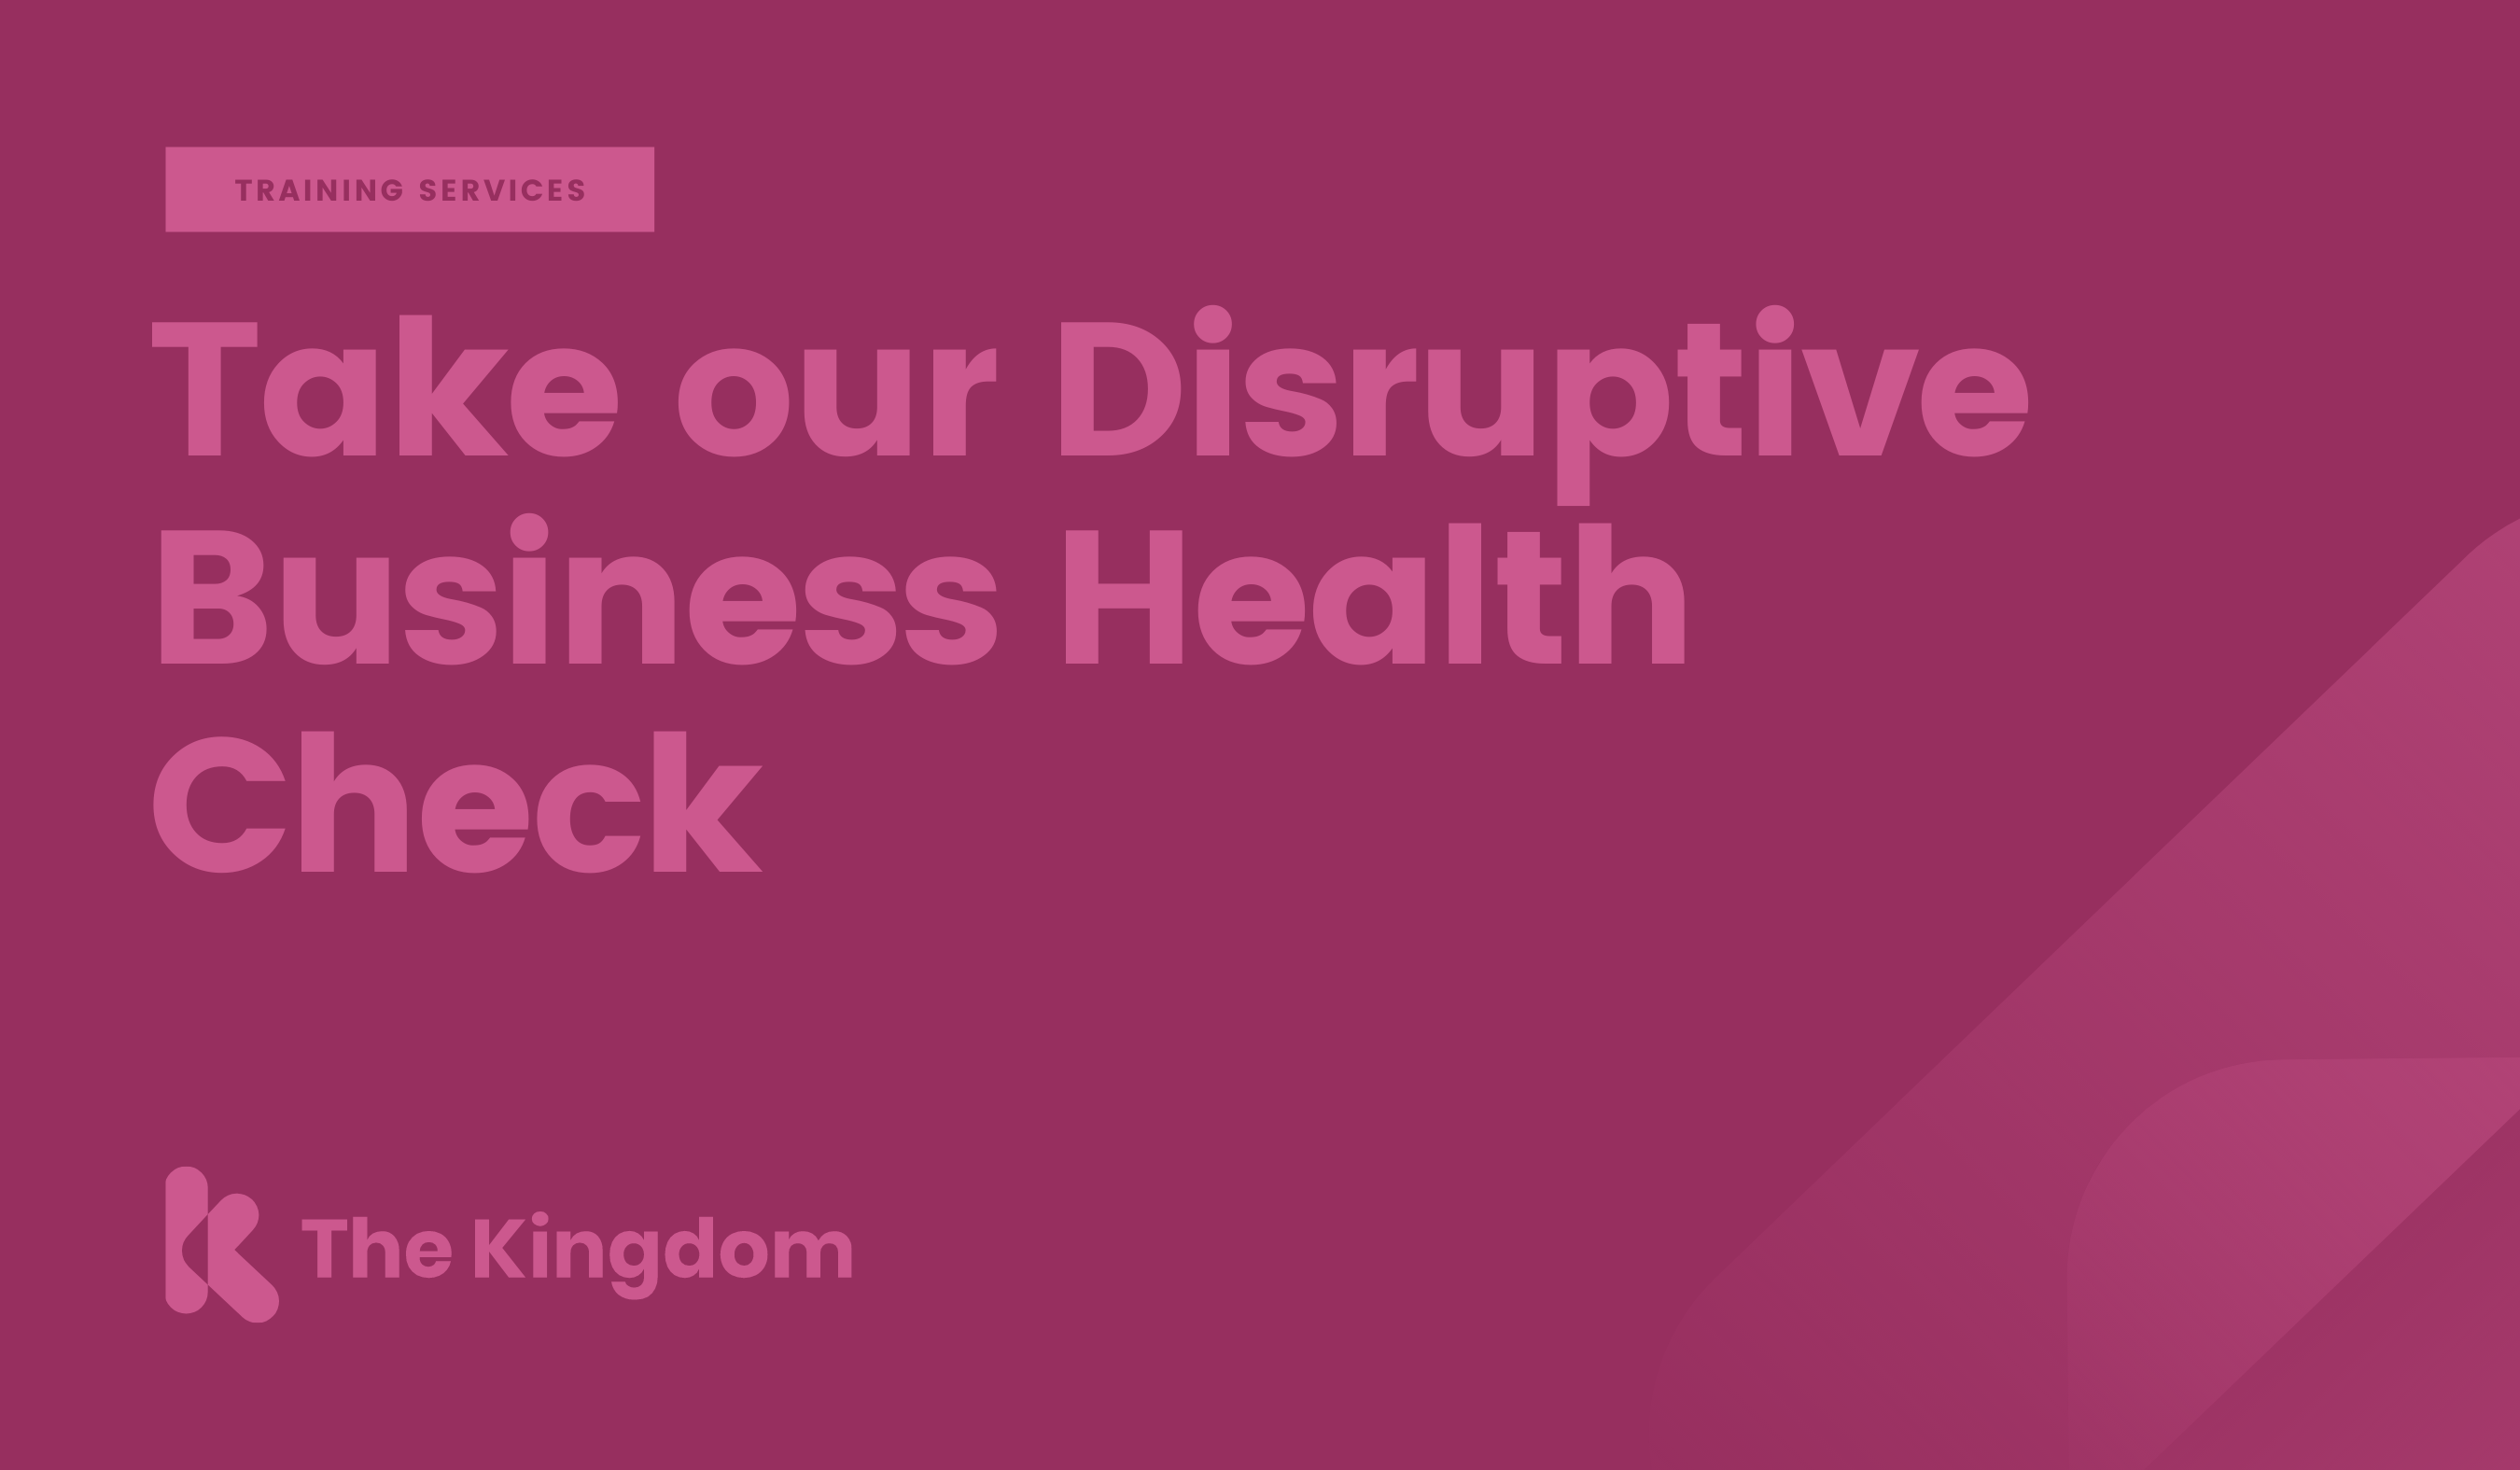 Take our Disruptive Business Health Check